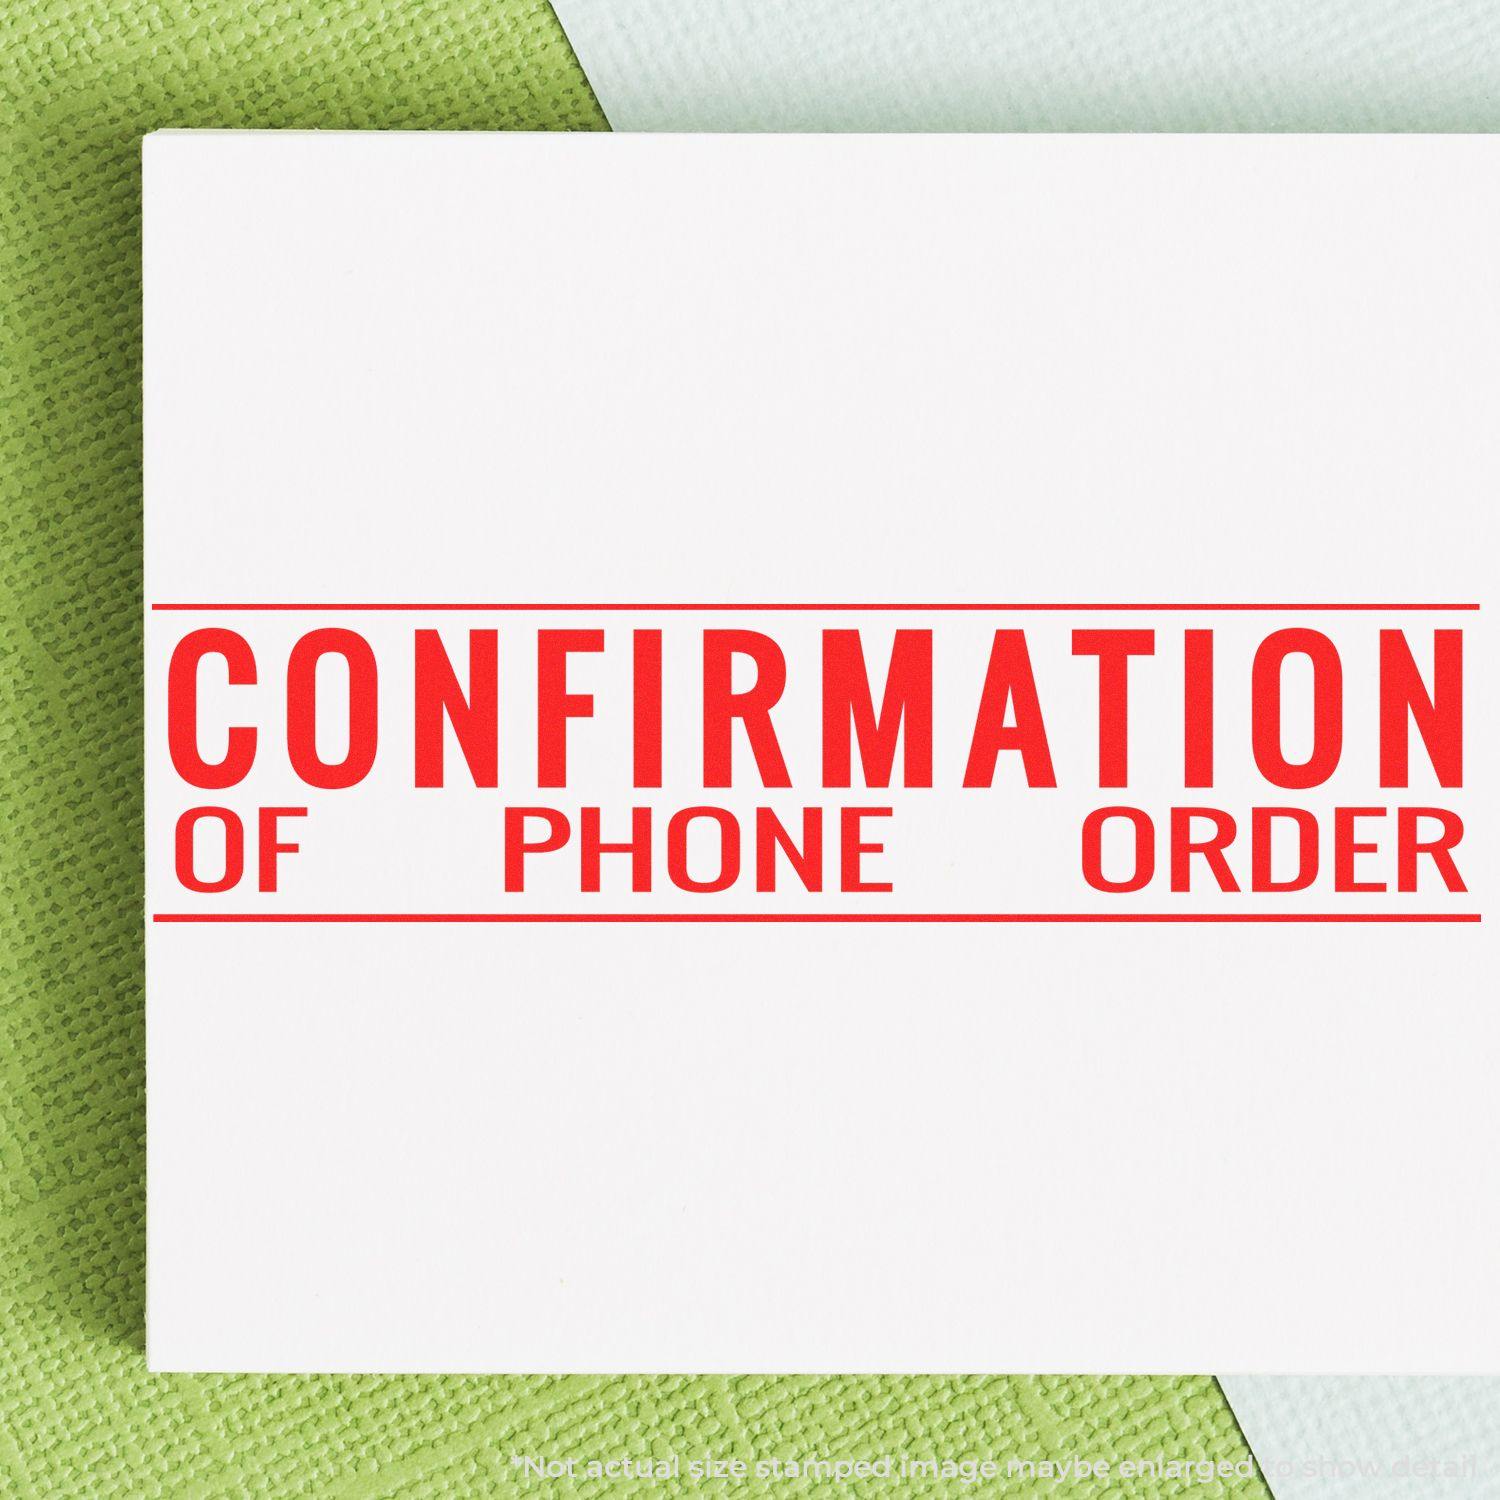 A stock office rubber stamp with a stamped image showing how the text "CONFIRMATION OF PHONE ORDER" is displayed after stamping.